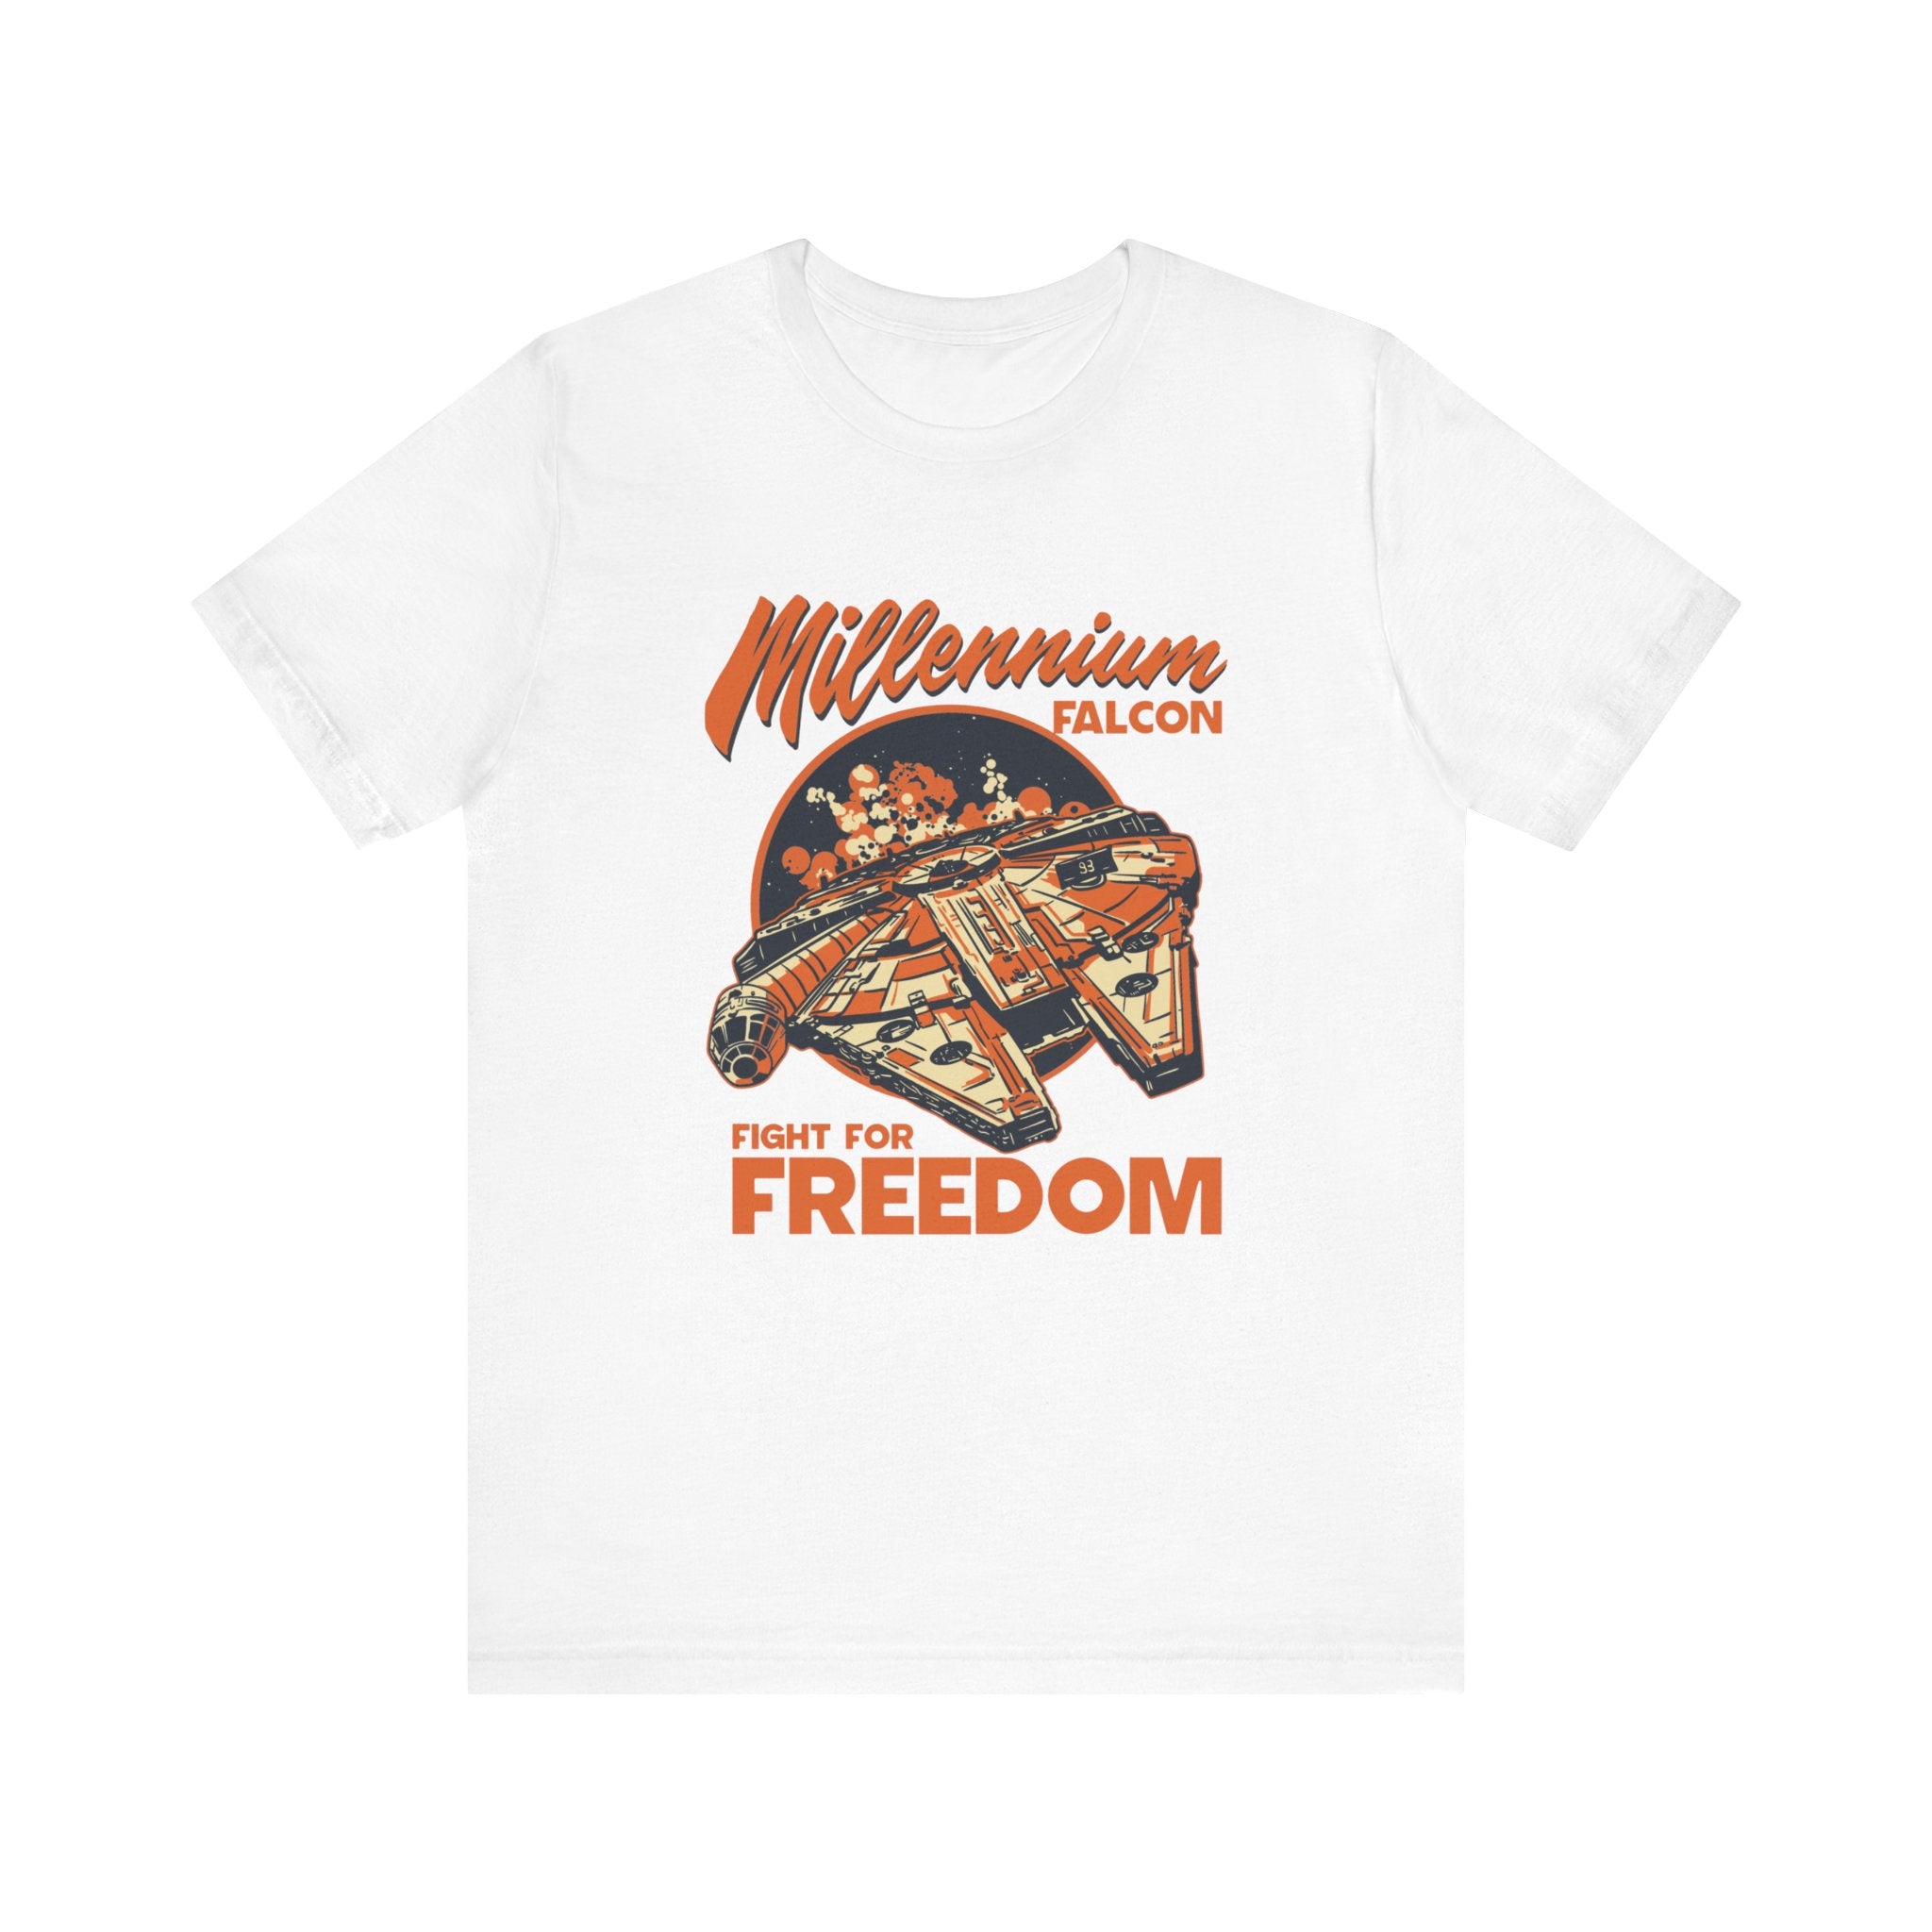 White Falcon t-shirt made of soft cotton, featuring a quality print graphic of the Millennium Falcon and text that reads "Millennium Falcon - Fight for Freedom" in orange and black colors.